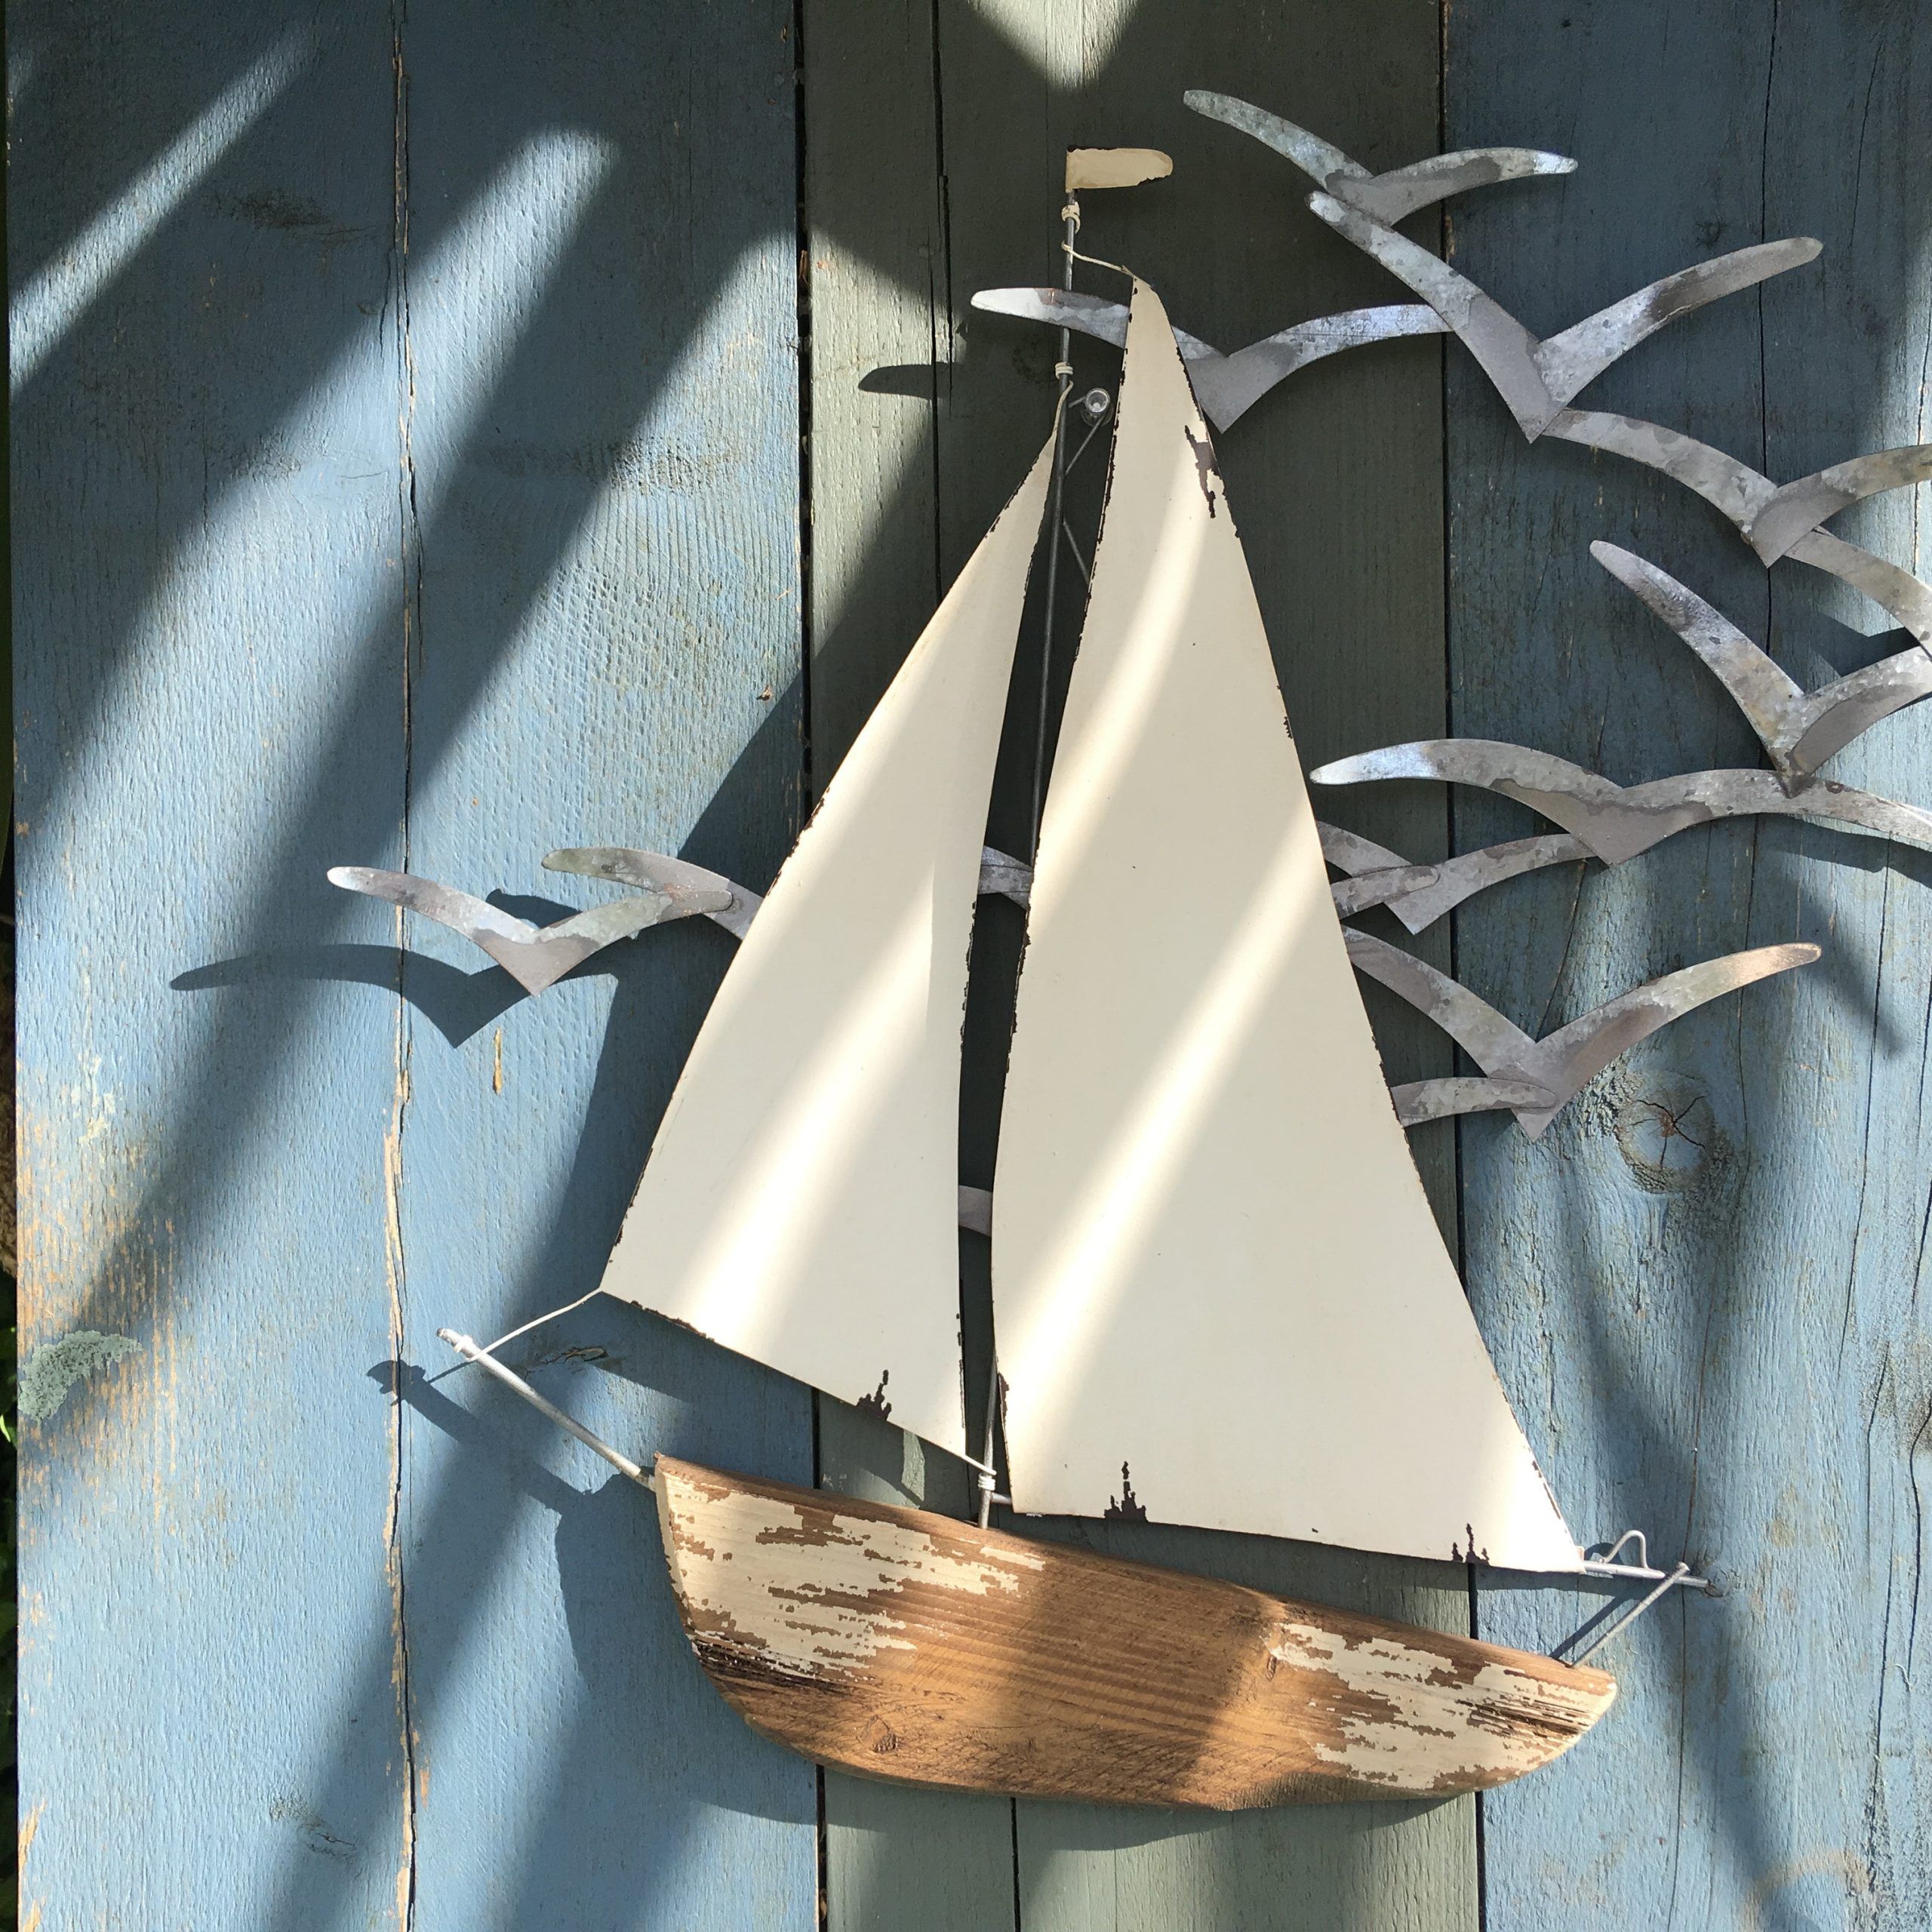 Tin And Wood Sail Boat With Seagulls Wall Art Regarding Latest Sail Wall Art (View 6 of 20)